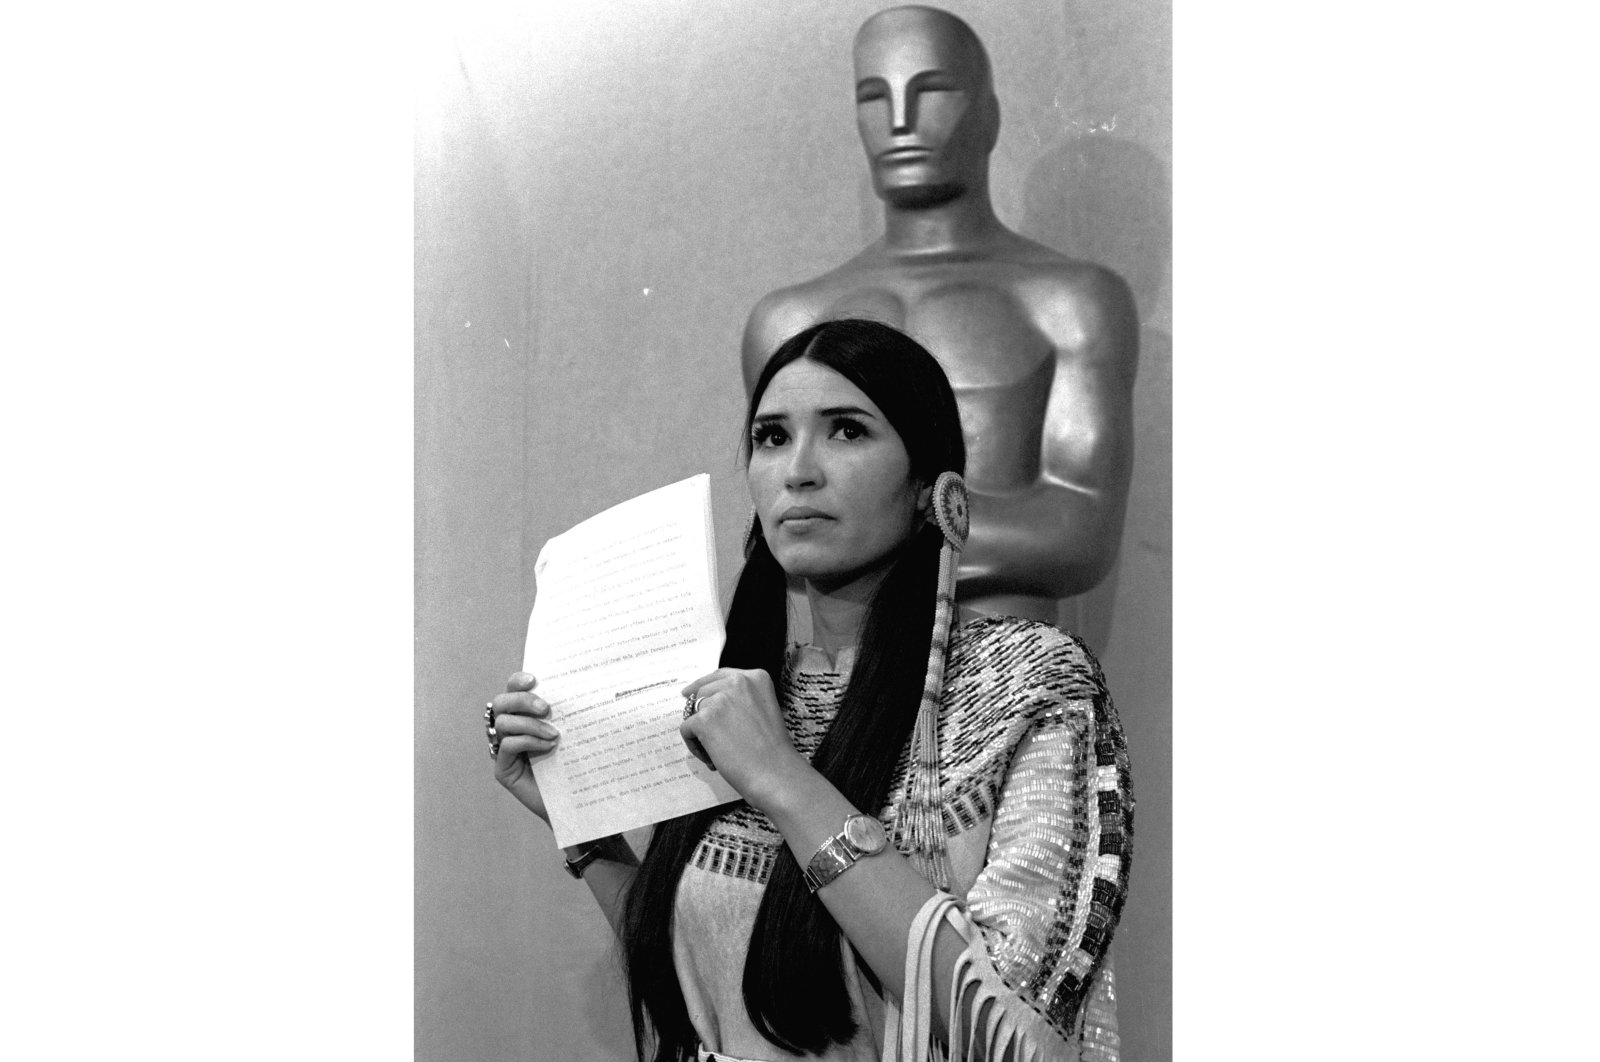 Sacheen Littlefeather appears at the Academy Awards ceremony to announce that Marlon Brando was declining his Oscar as best actor for his role in &quot;The Godfather,&quot; on March 27, 1973. (AP)